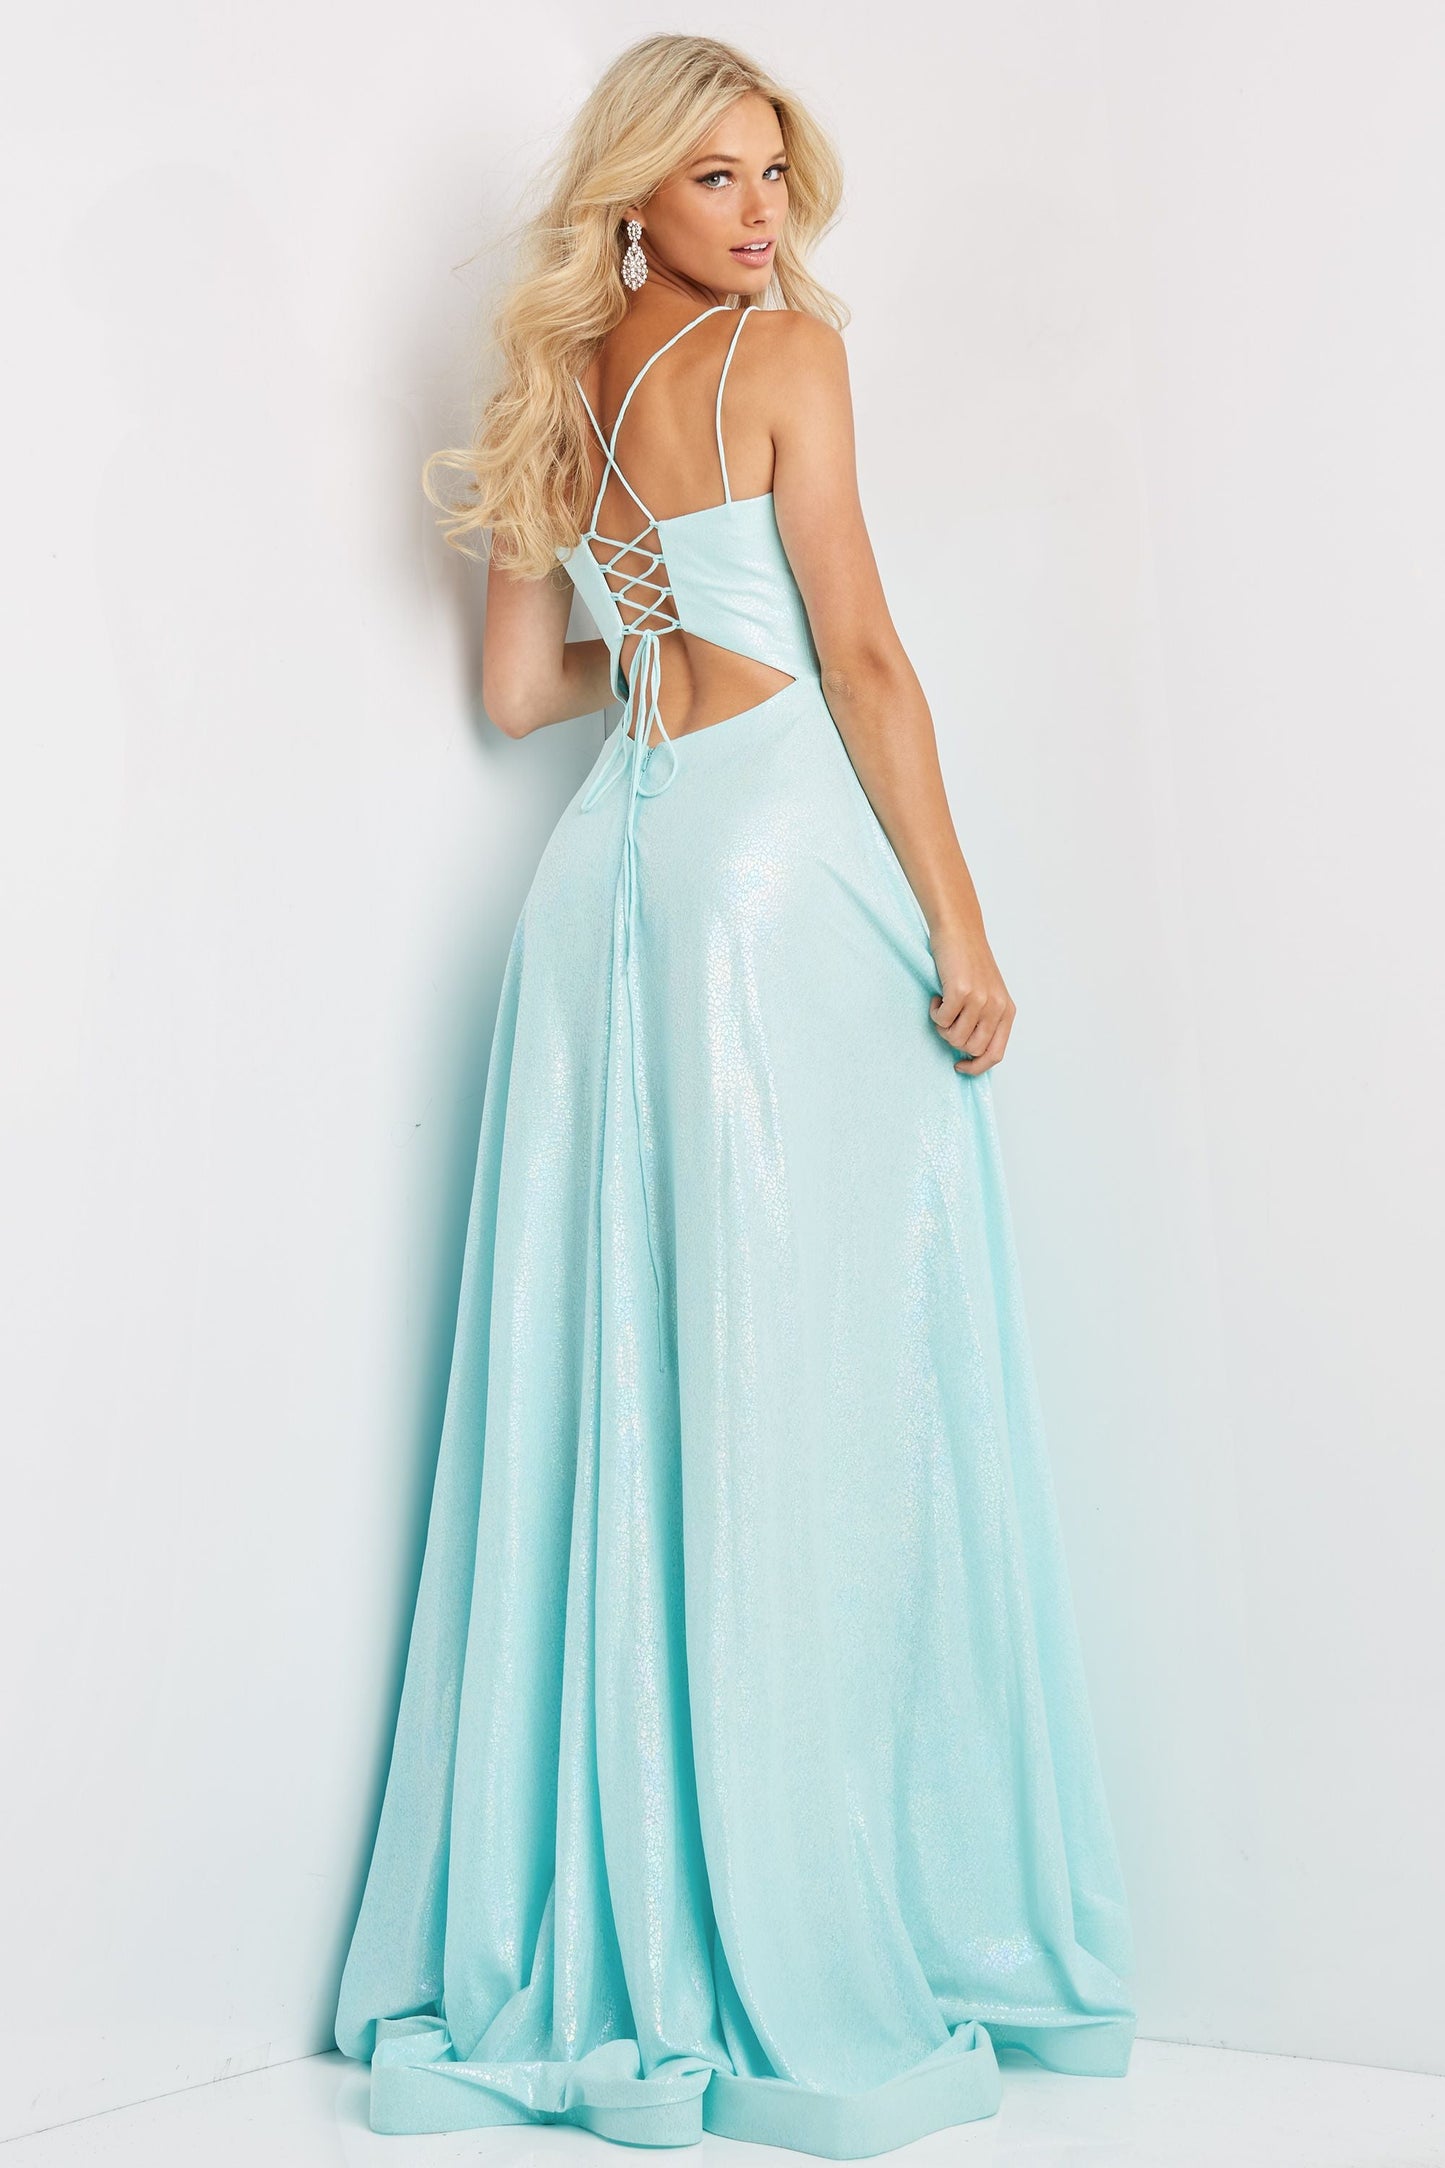 Jovani JVN08490  This is a JVN prom dress made by Jovani,  JVN08490 is long party dress featuring an A-line silhouette with a V-neckline, held with double spaghetti straps that form the lace-up back. A contour waistband cinches this trendy prom gown, finished with a horsehair hem and sweep train.  The corset in the back with cutouts helps lace up to fit you superb.